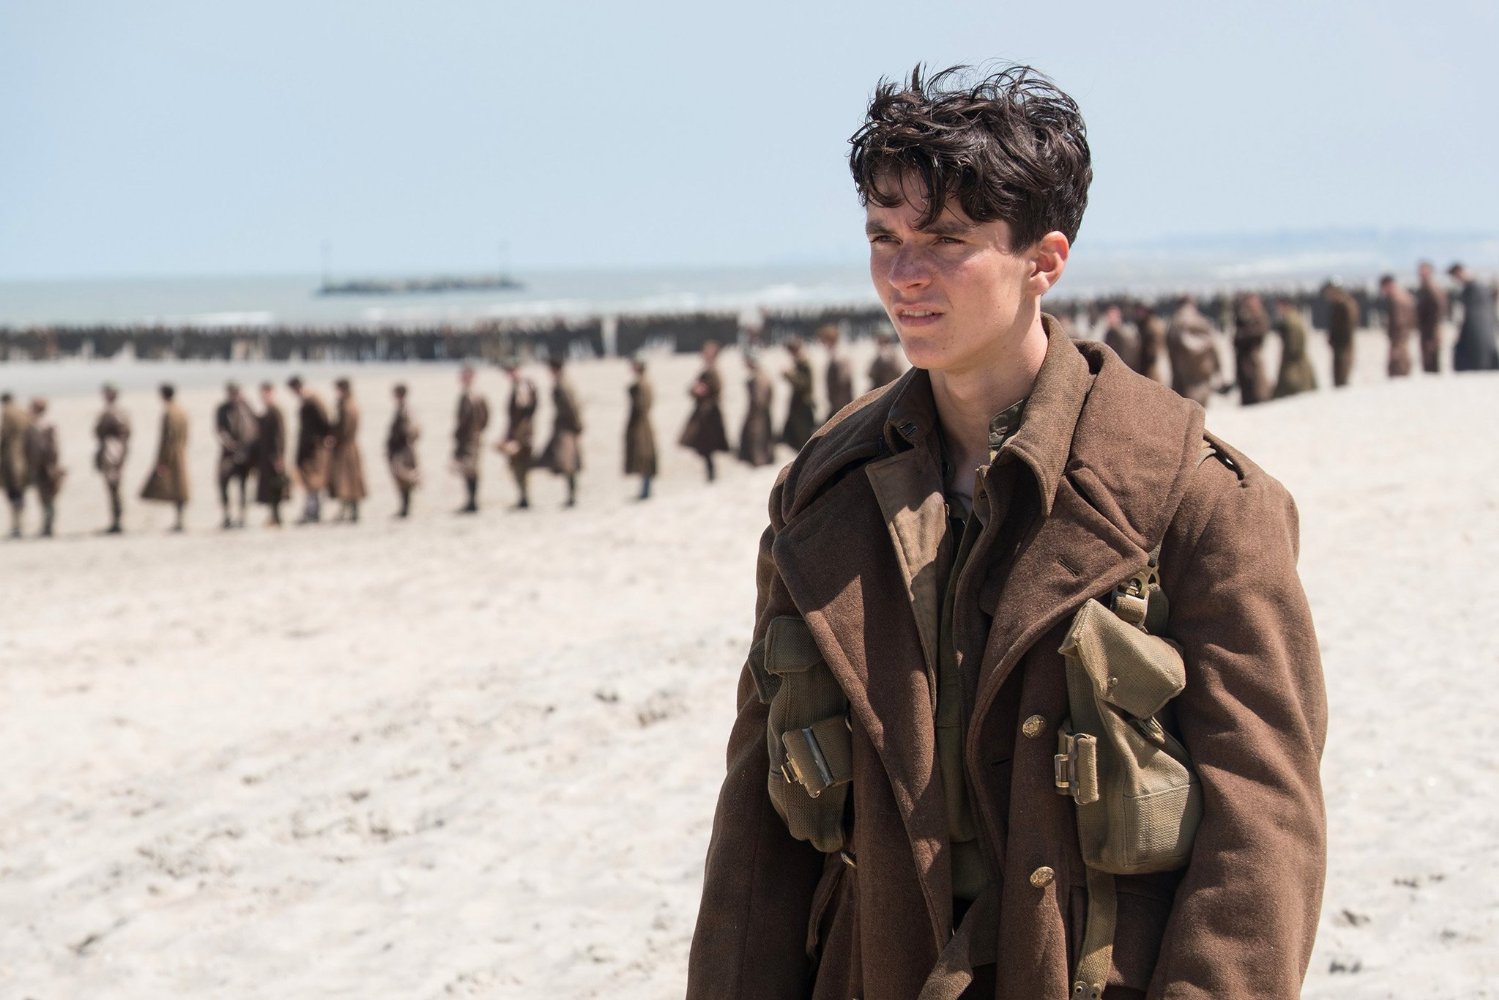 PHOTO: Fionn Whitehead appears in a scene from the movie, "Dunkirk," 2017.